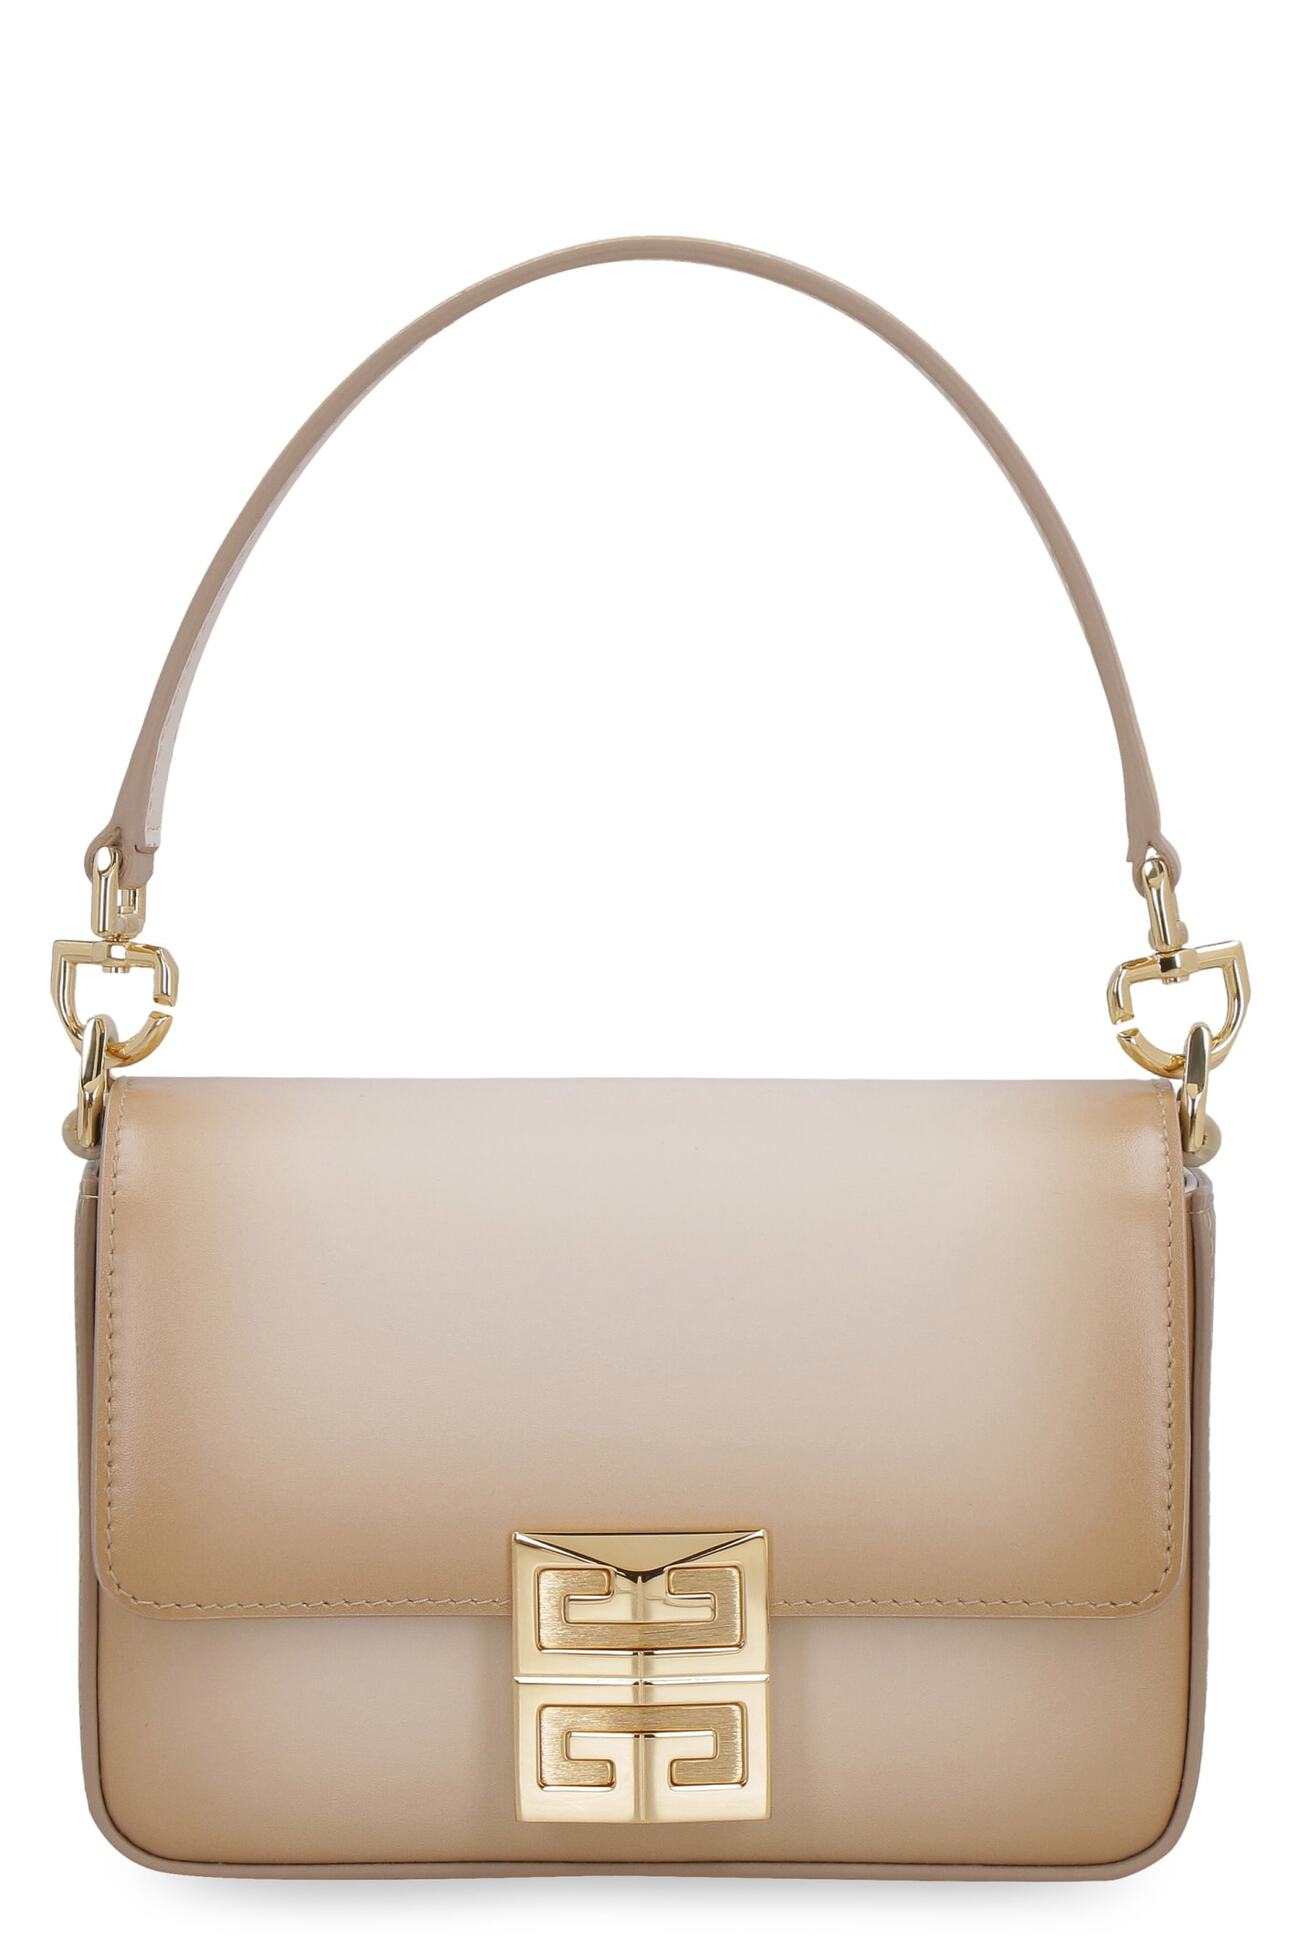 Givenchy 4g Leather Mini Crossbody Bag in beige